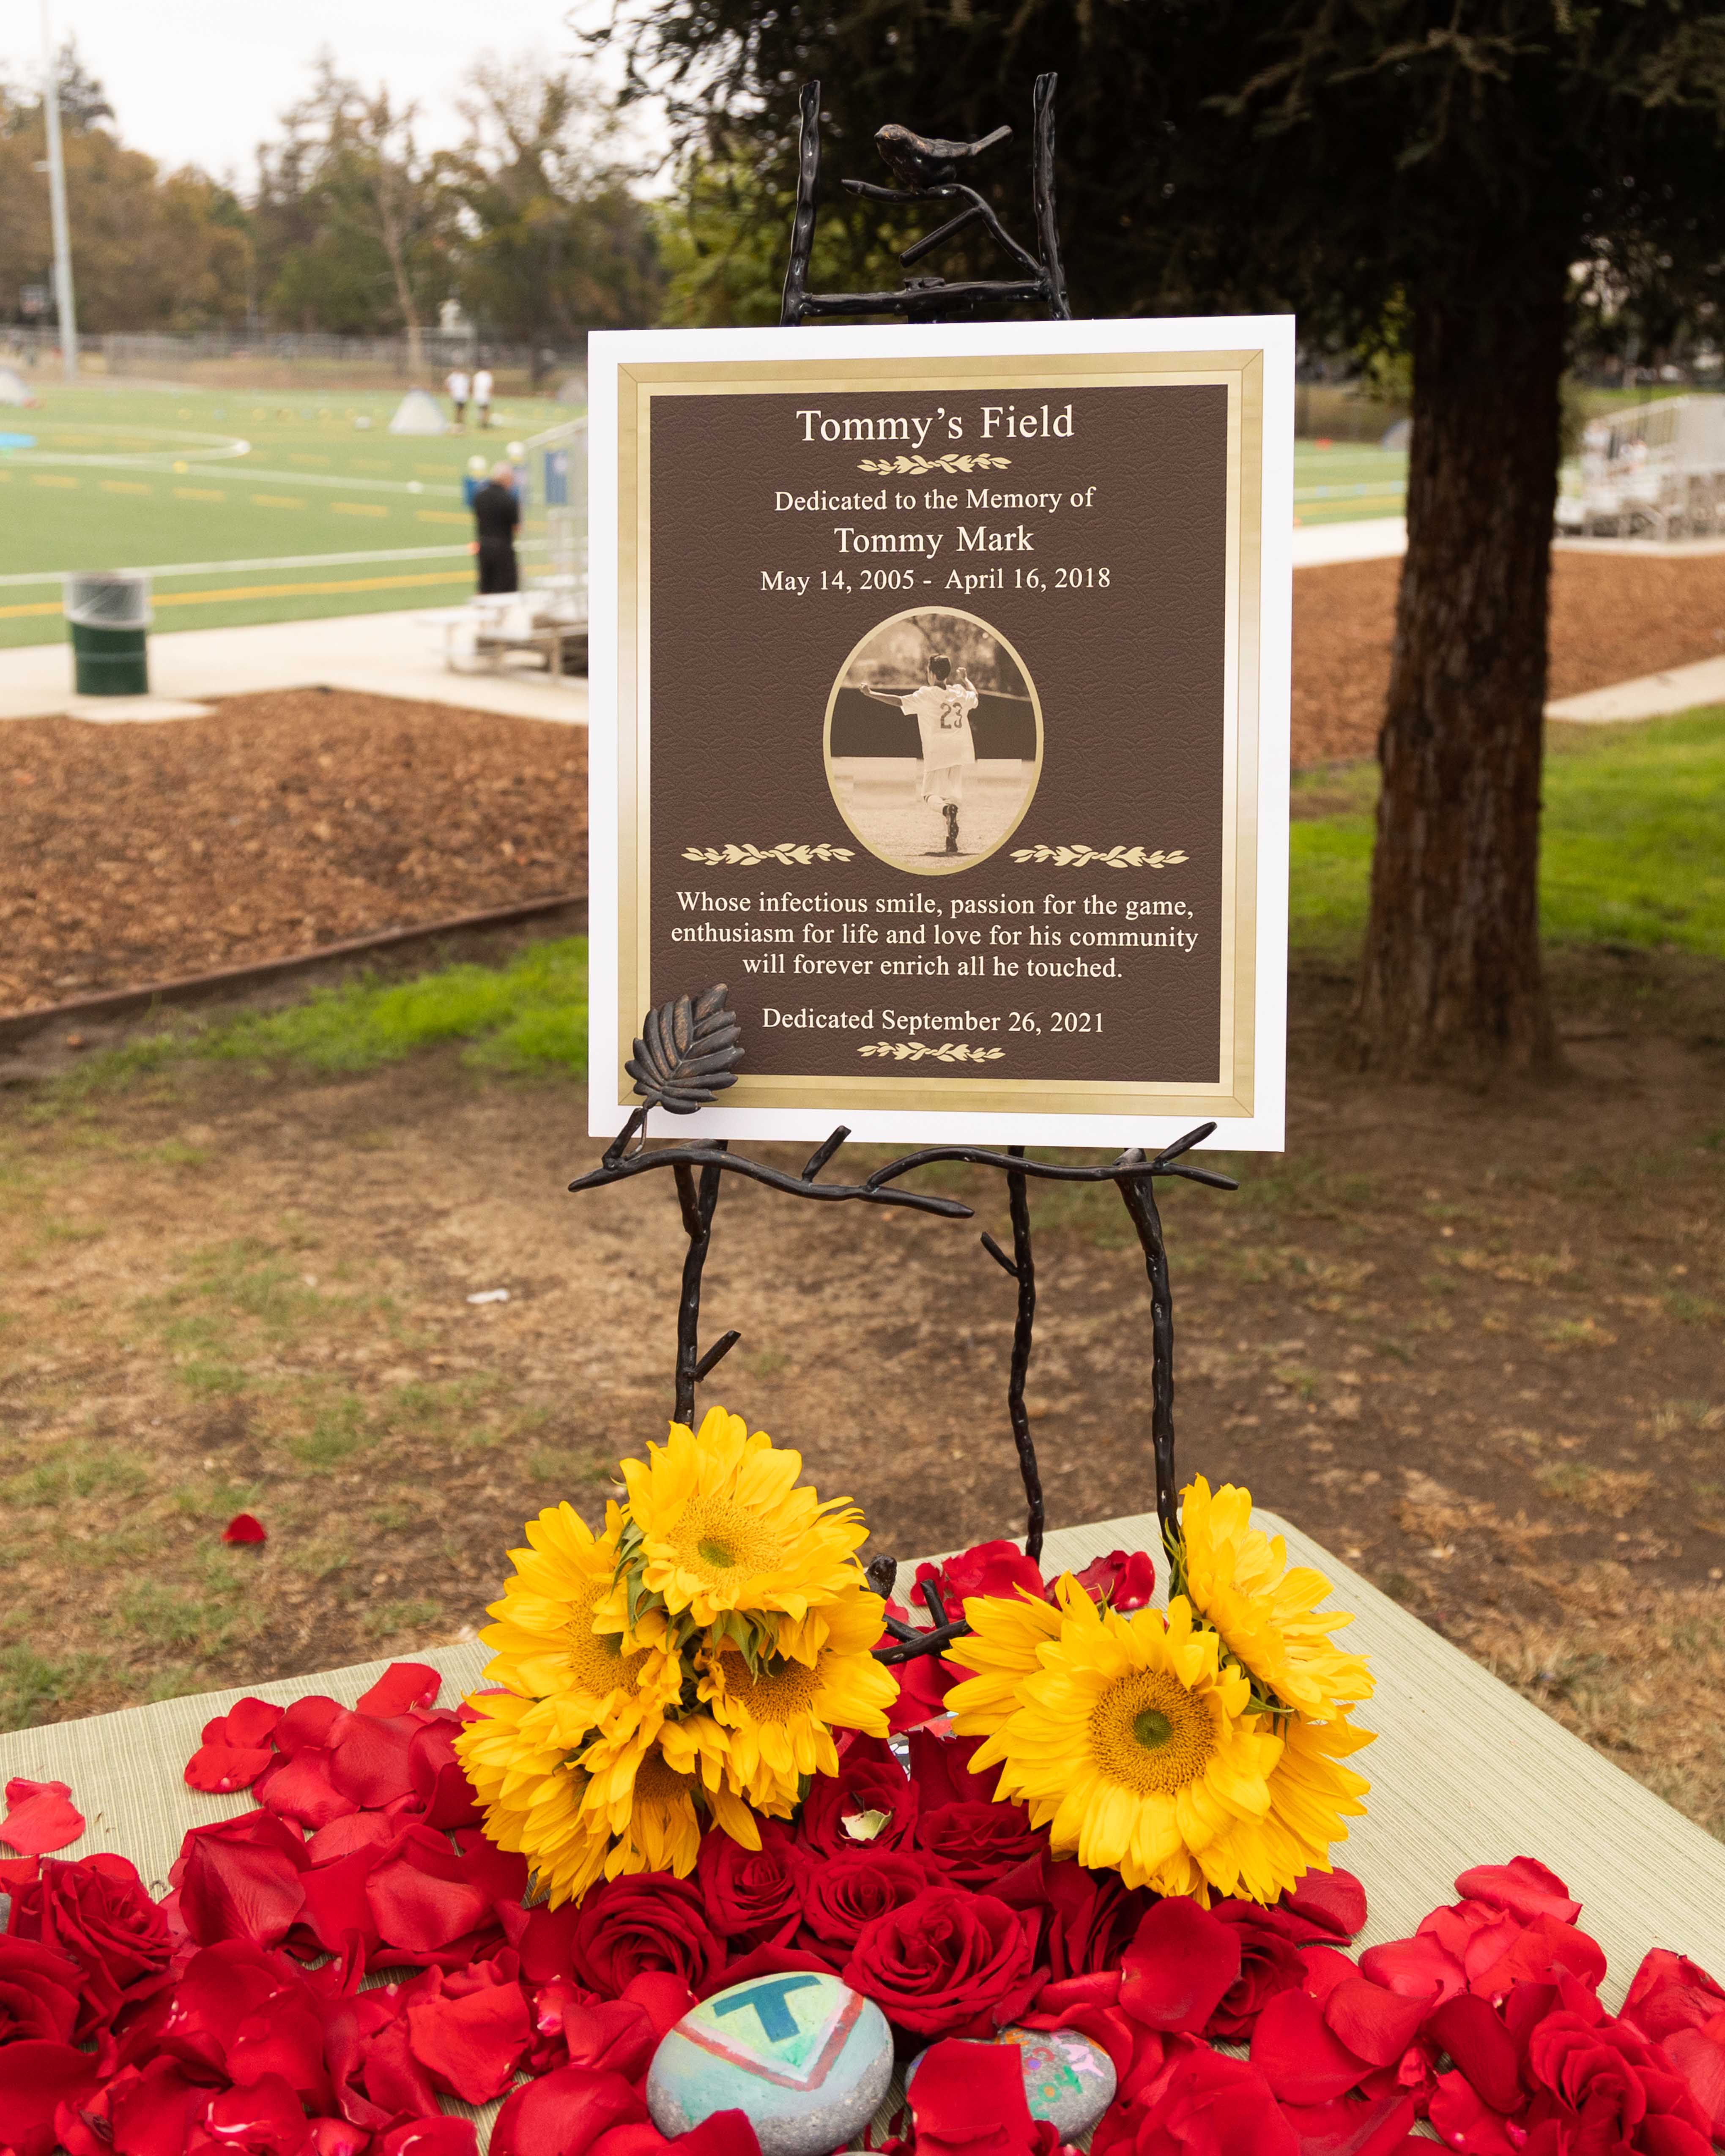 A plaque with an inscribed message honoring Tommy Mark is on display at the field grand opening surrounded by flowers